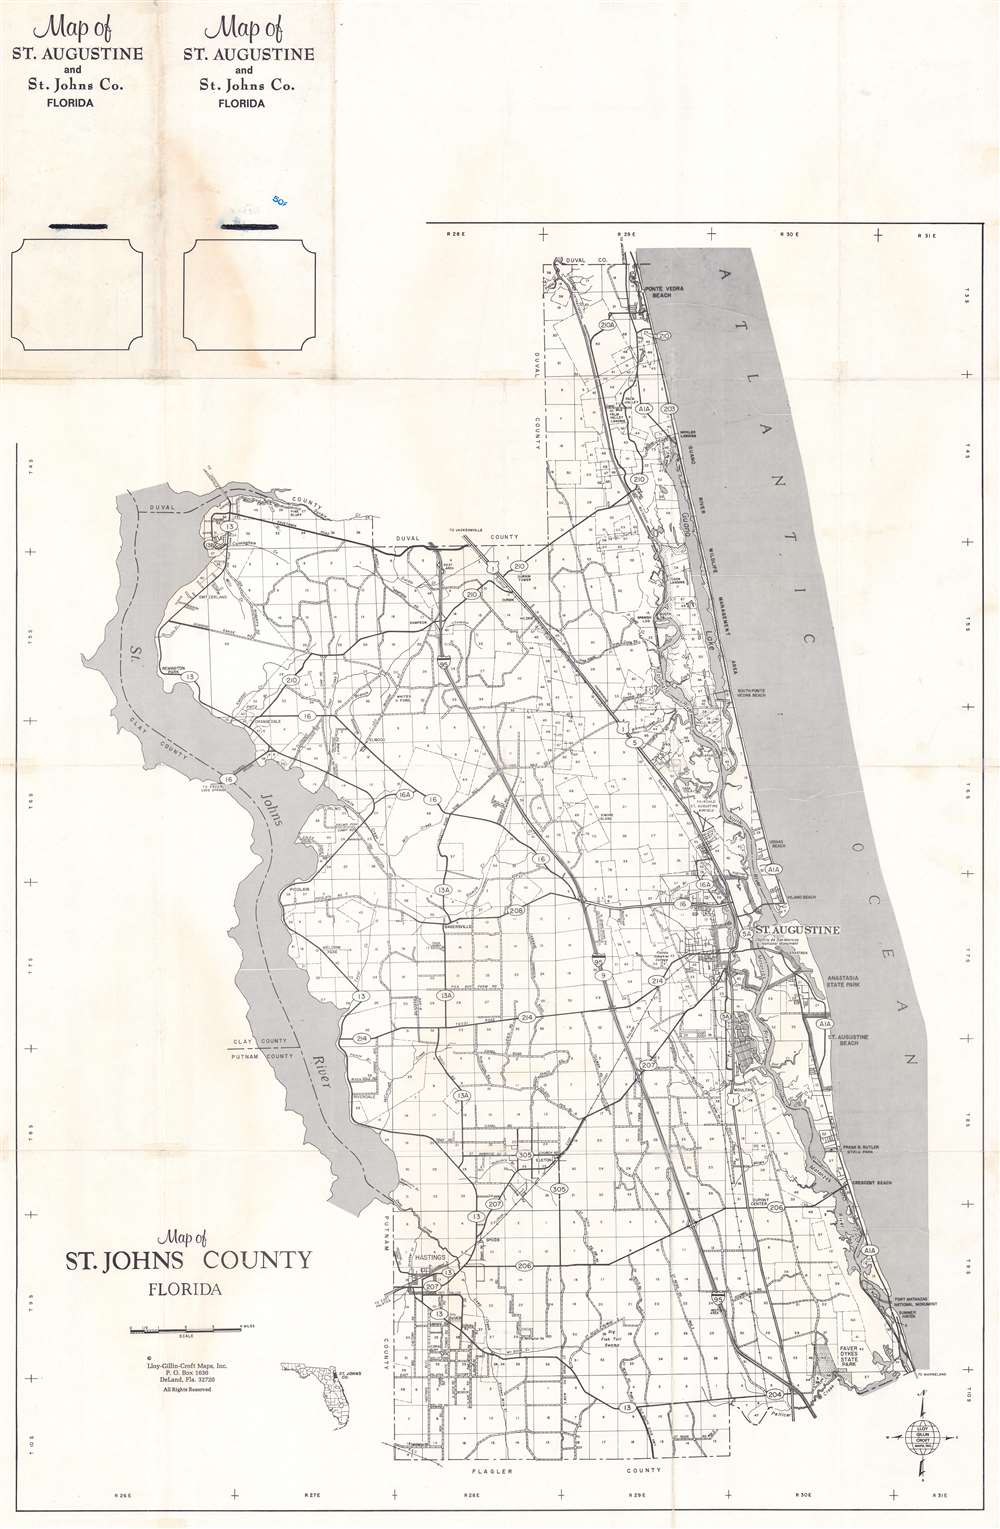 Map of St. Augustine and St. Johns County, Florida. - Alternate View 2